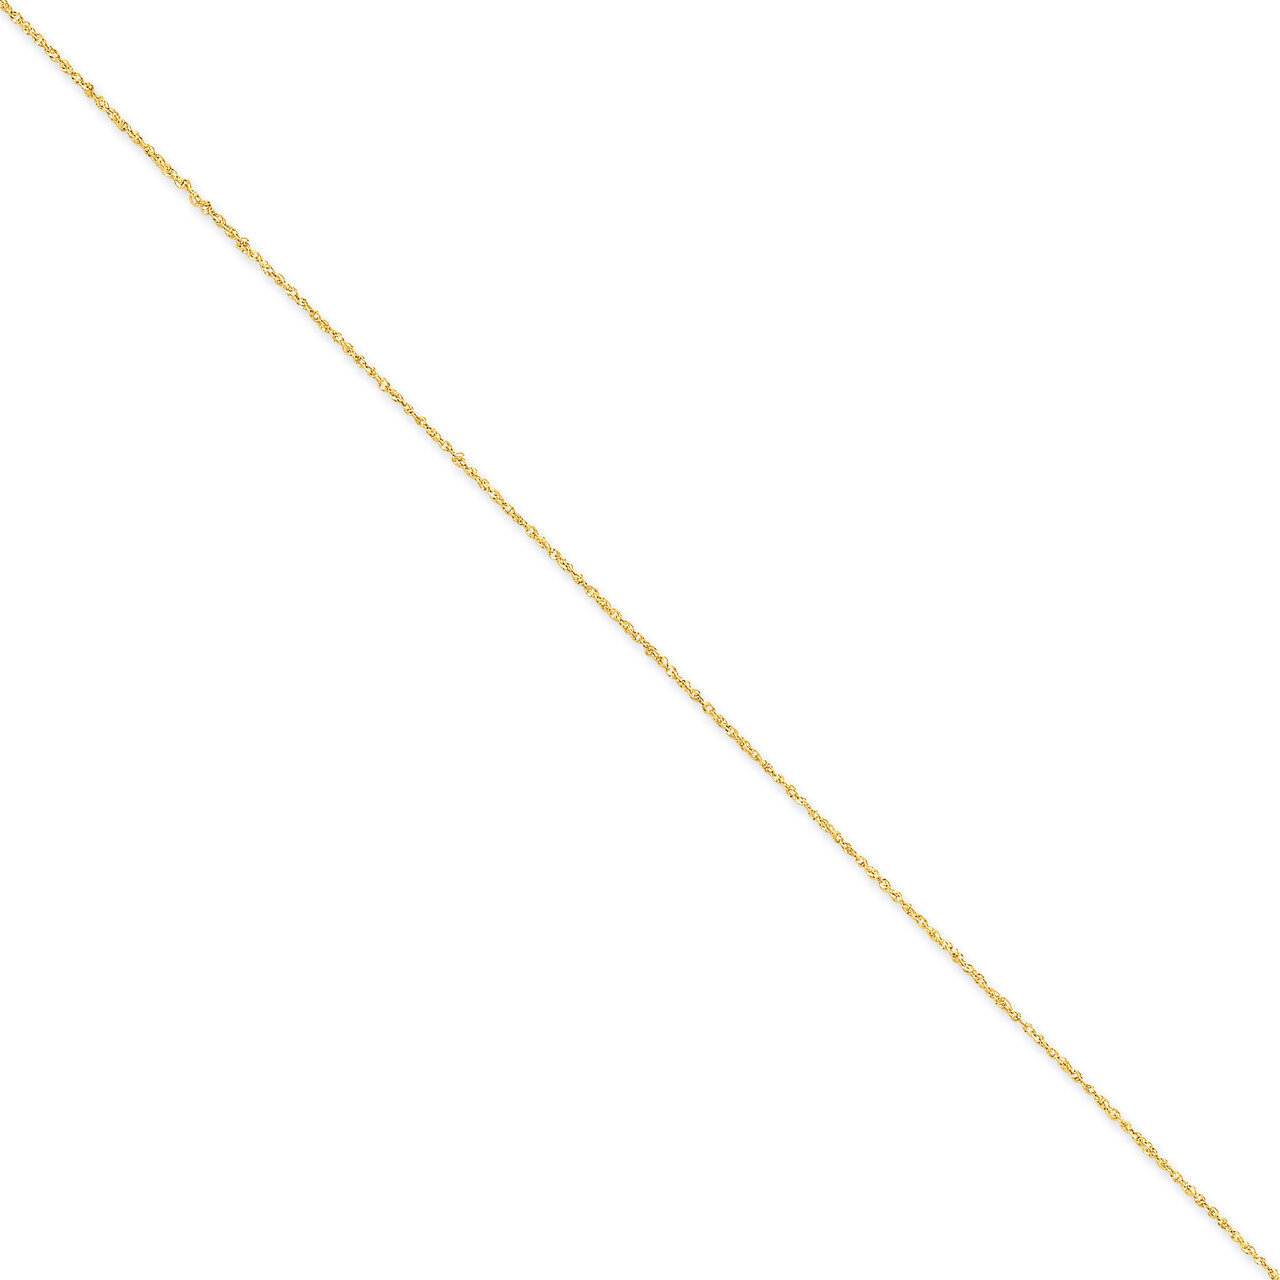 1.1mm Ropa Chain 14 Inch 14k Gold RPA020-14